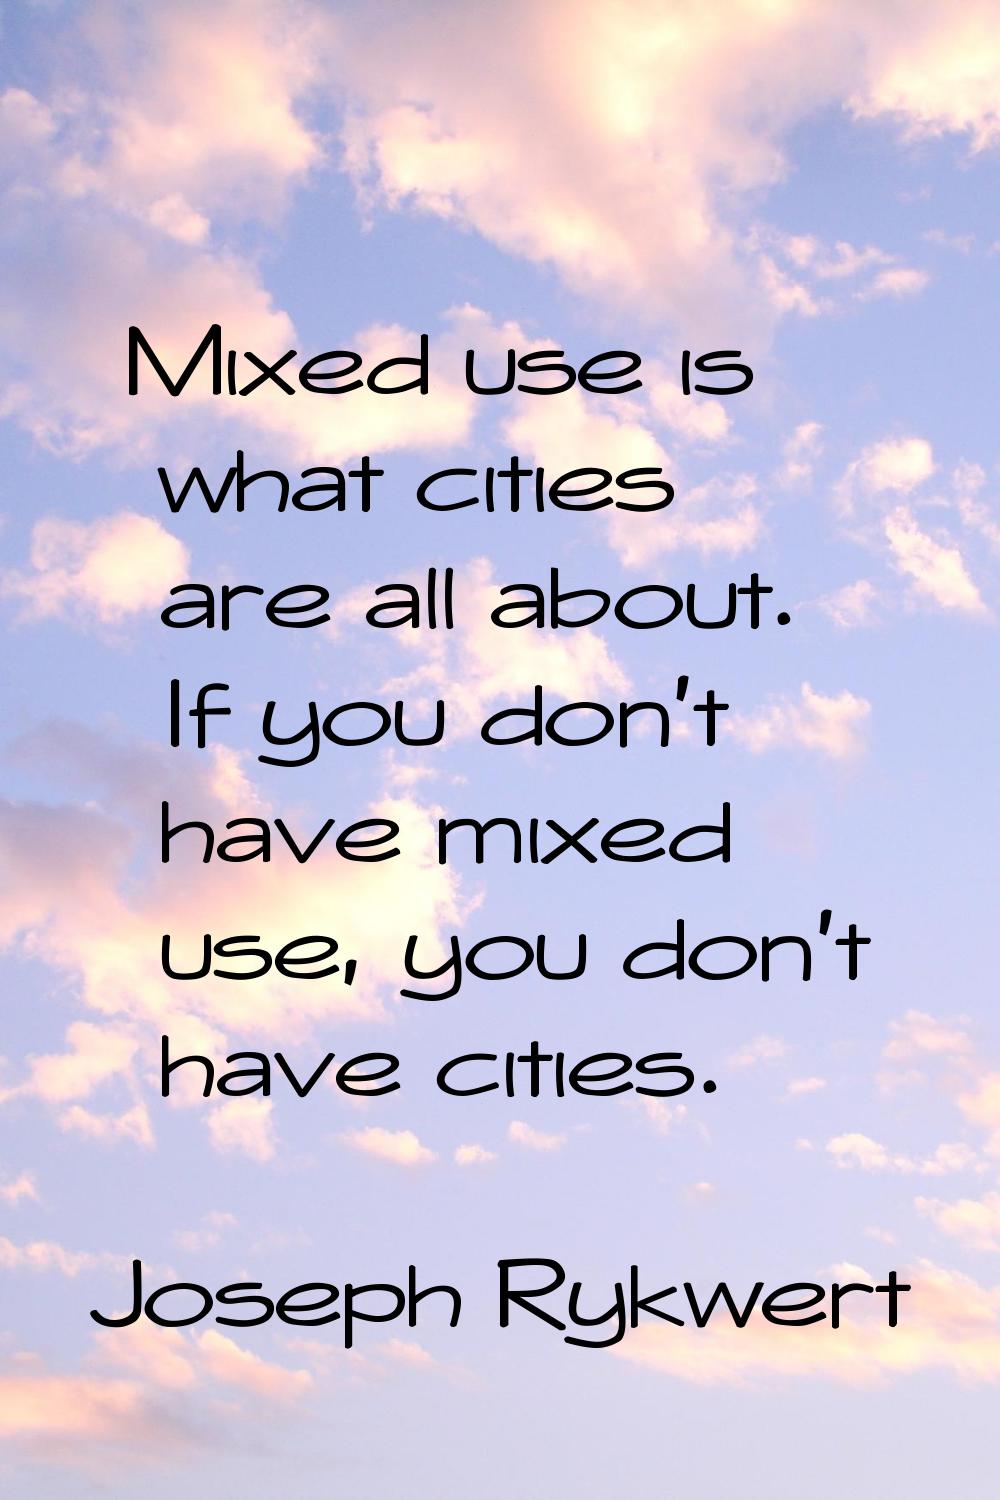 Mixed use is what cities are all about. If you don't have mixed use, you don't have cities.